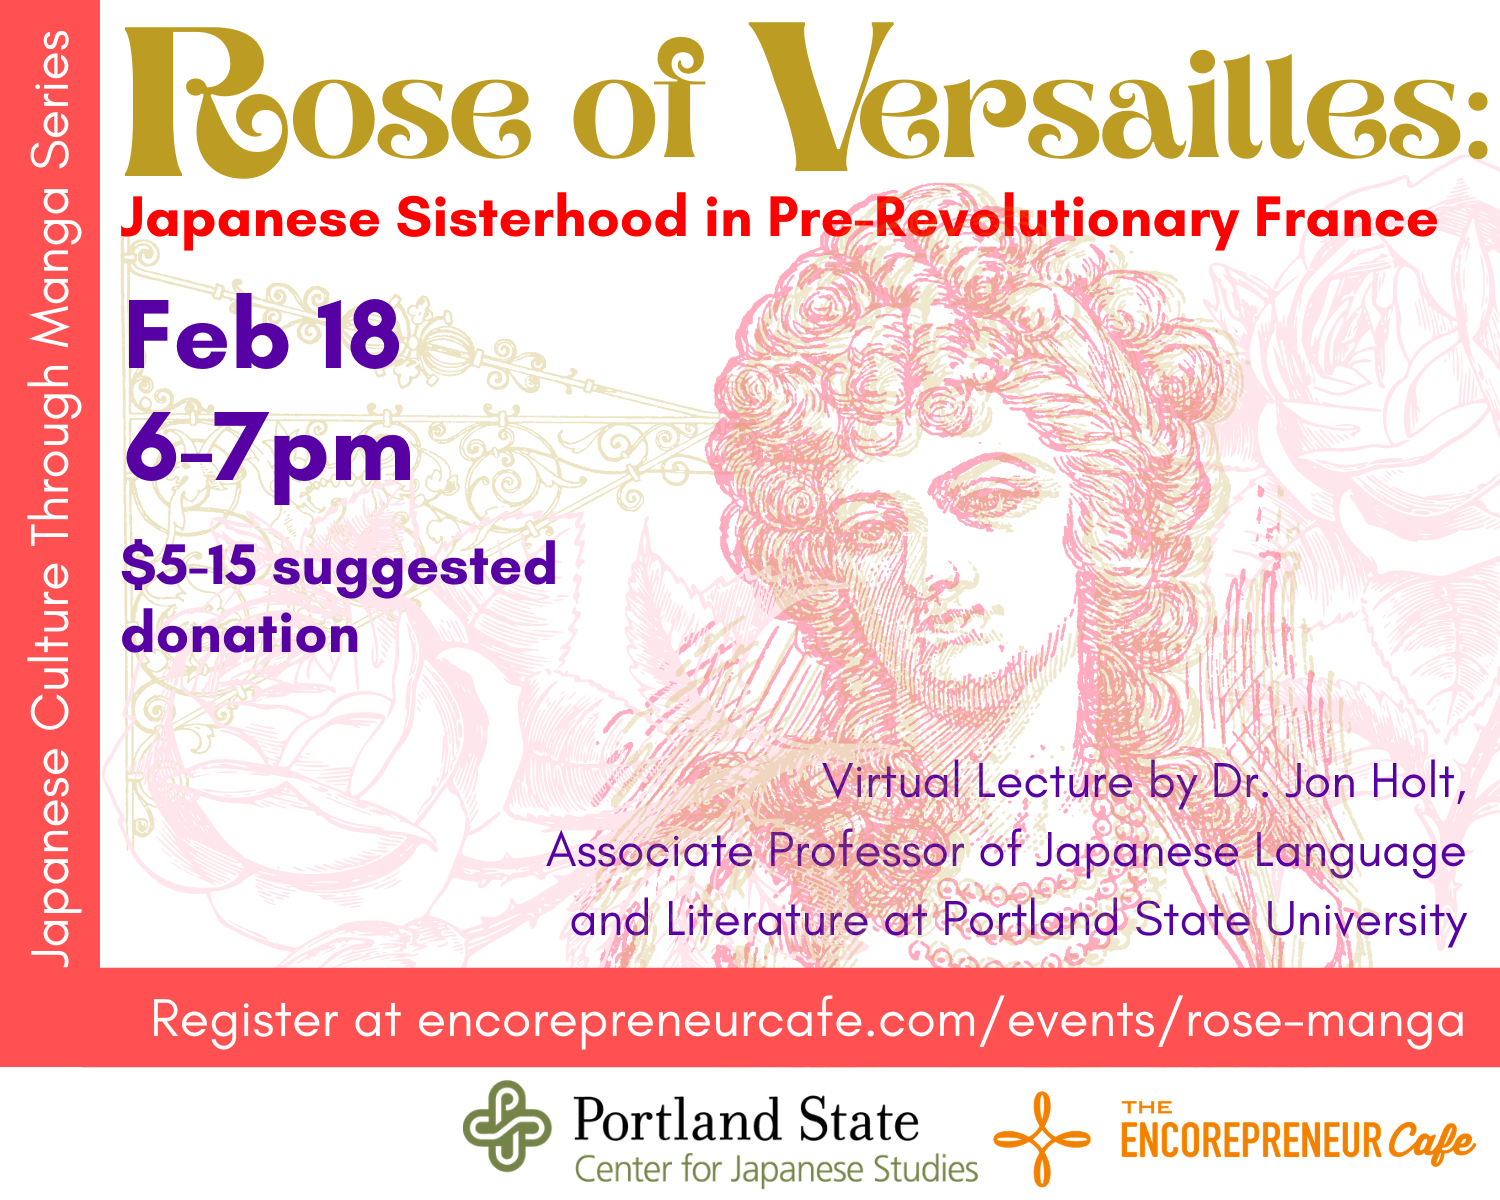 Rose of Versailles flyer in gold, rose, purple, and light pink. The image is a vintage etching-style illustration of Marie Antoinette surrounded by roses and wrought iron design. Other text reads: Japanese culture through manga series. Rose of Versailles: Japanese Sisterhood in Pre-Revolutionary France. Feb 18, 6-7pm, $5-15 donation. Virtual lecture by Dr. Jon Holt, Associate Professor of Janpanese Language and Literature at Portland State University.